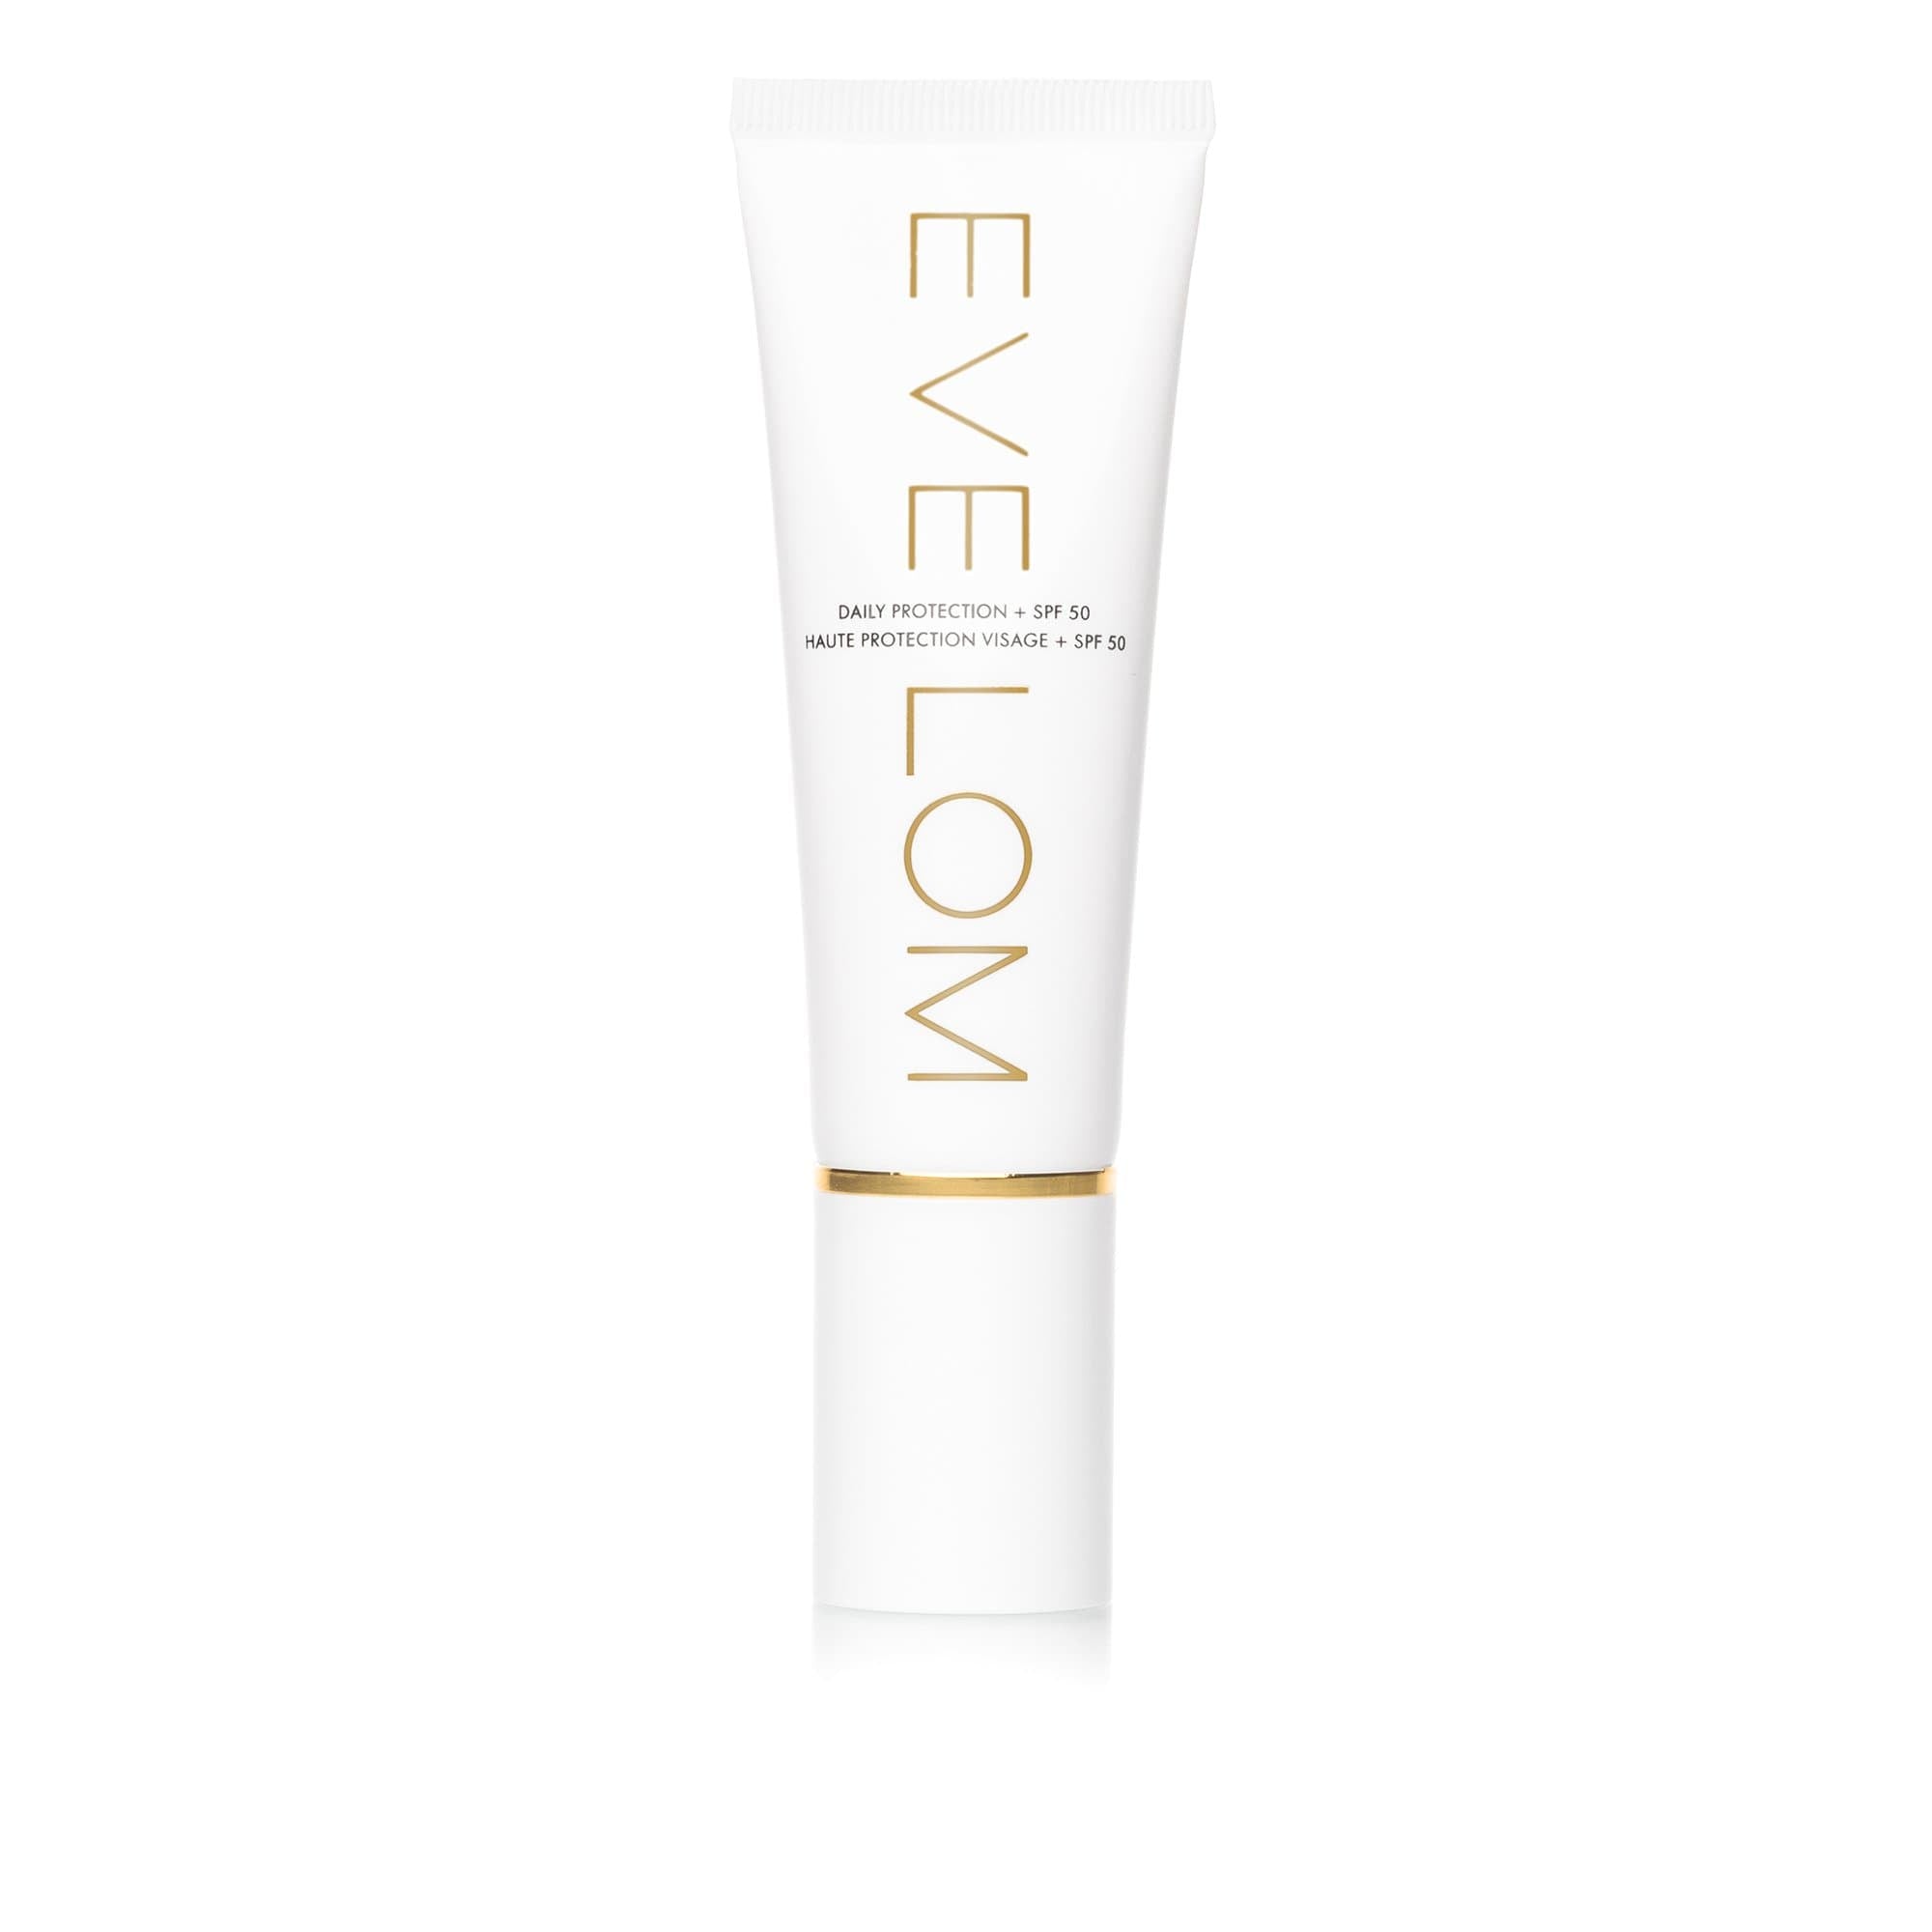 Daily Protection + SPF 50 EVE LOM Daily Protector